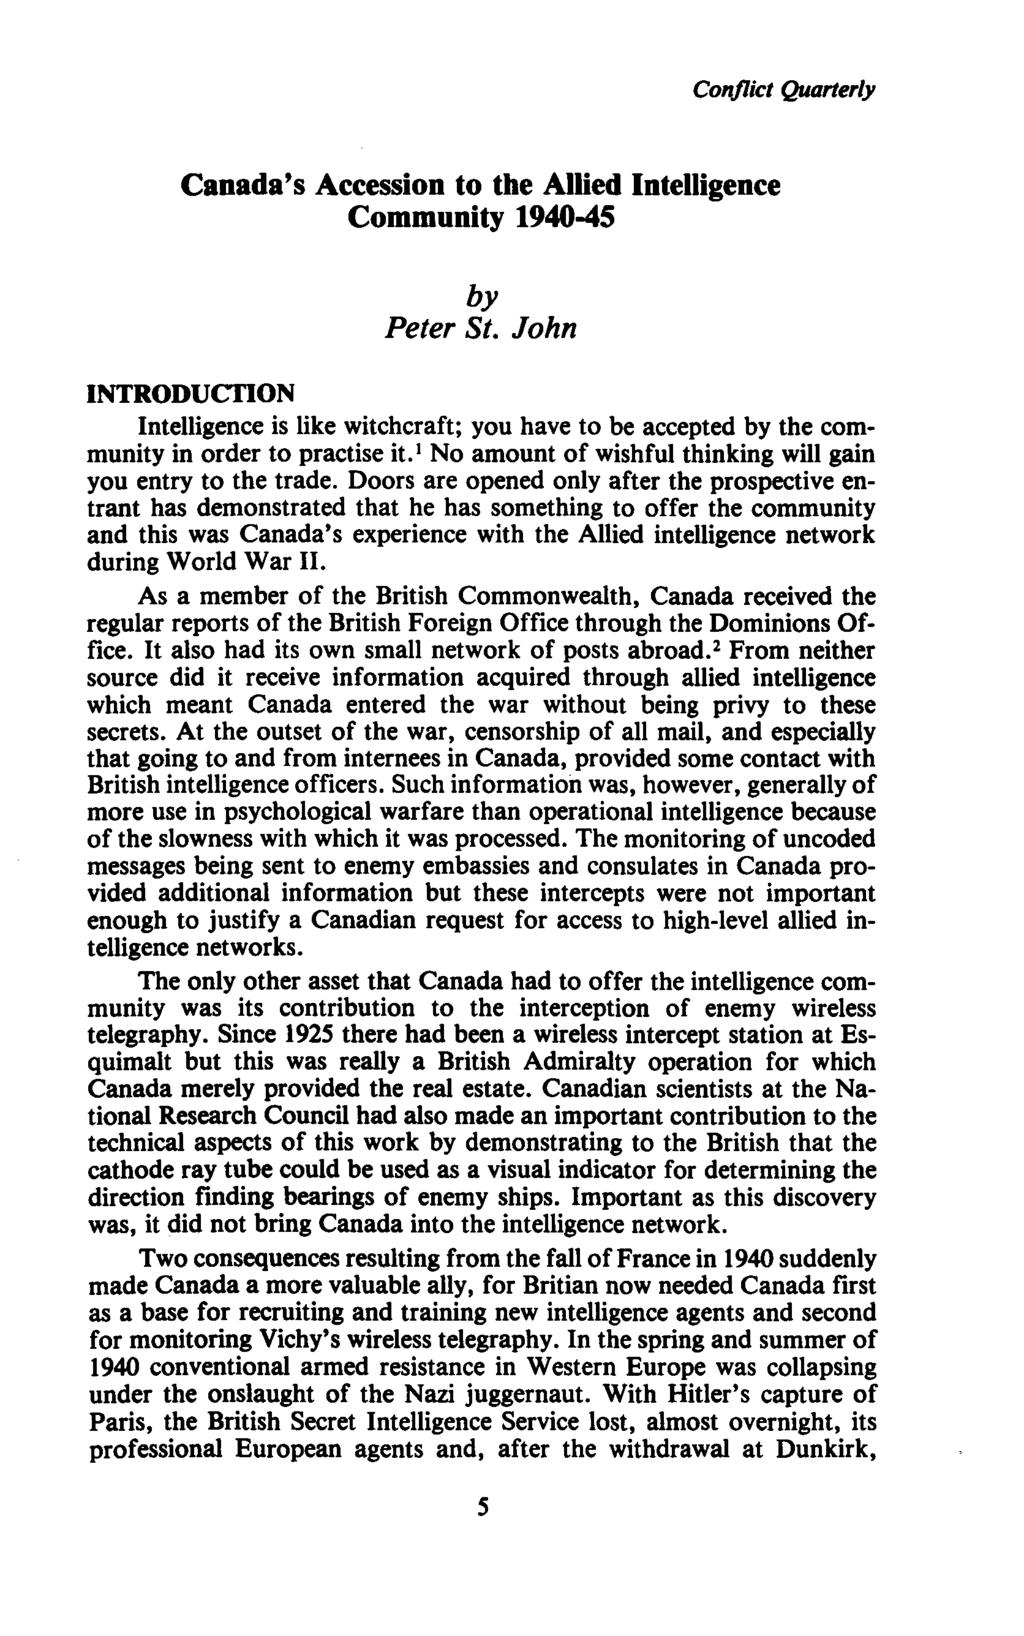 Conflict Quarterly Canada's Accession to the Allied Intelligence Community 1940-45 by Peter St.